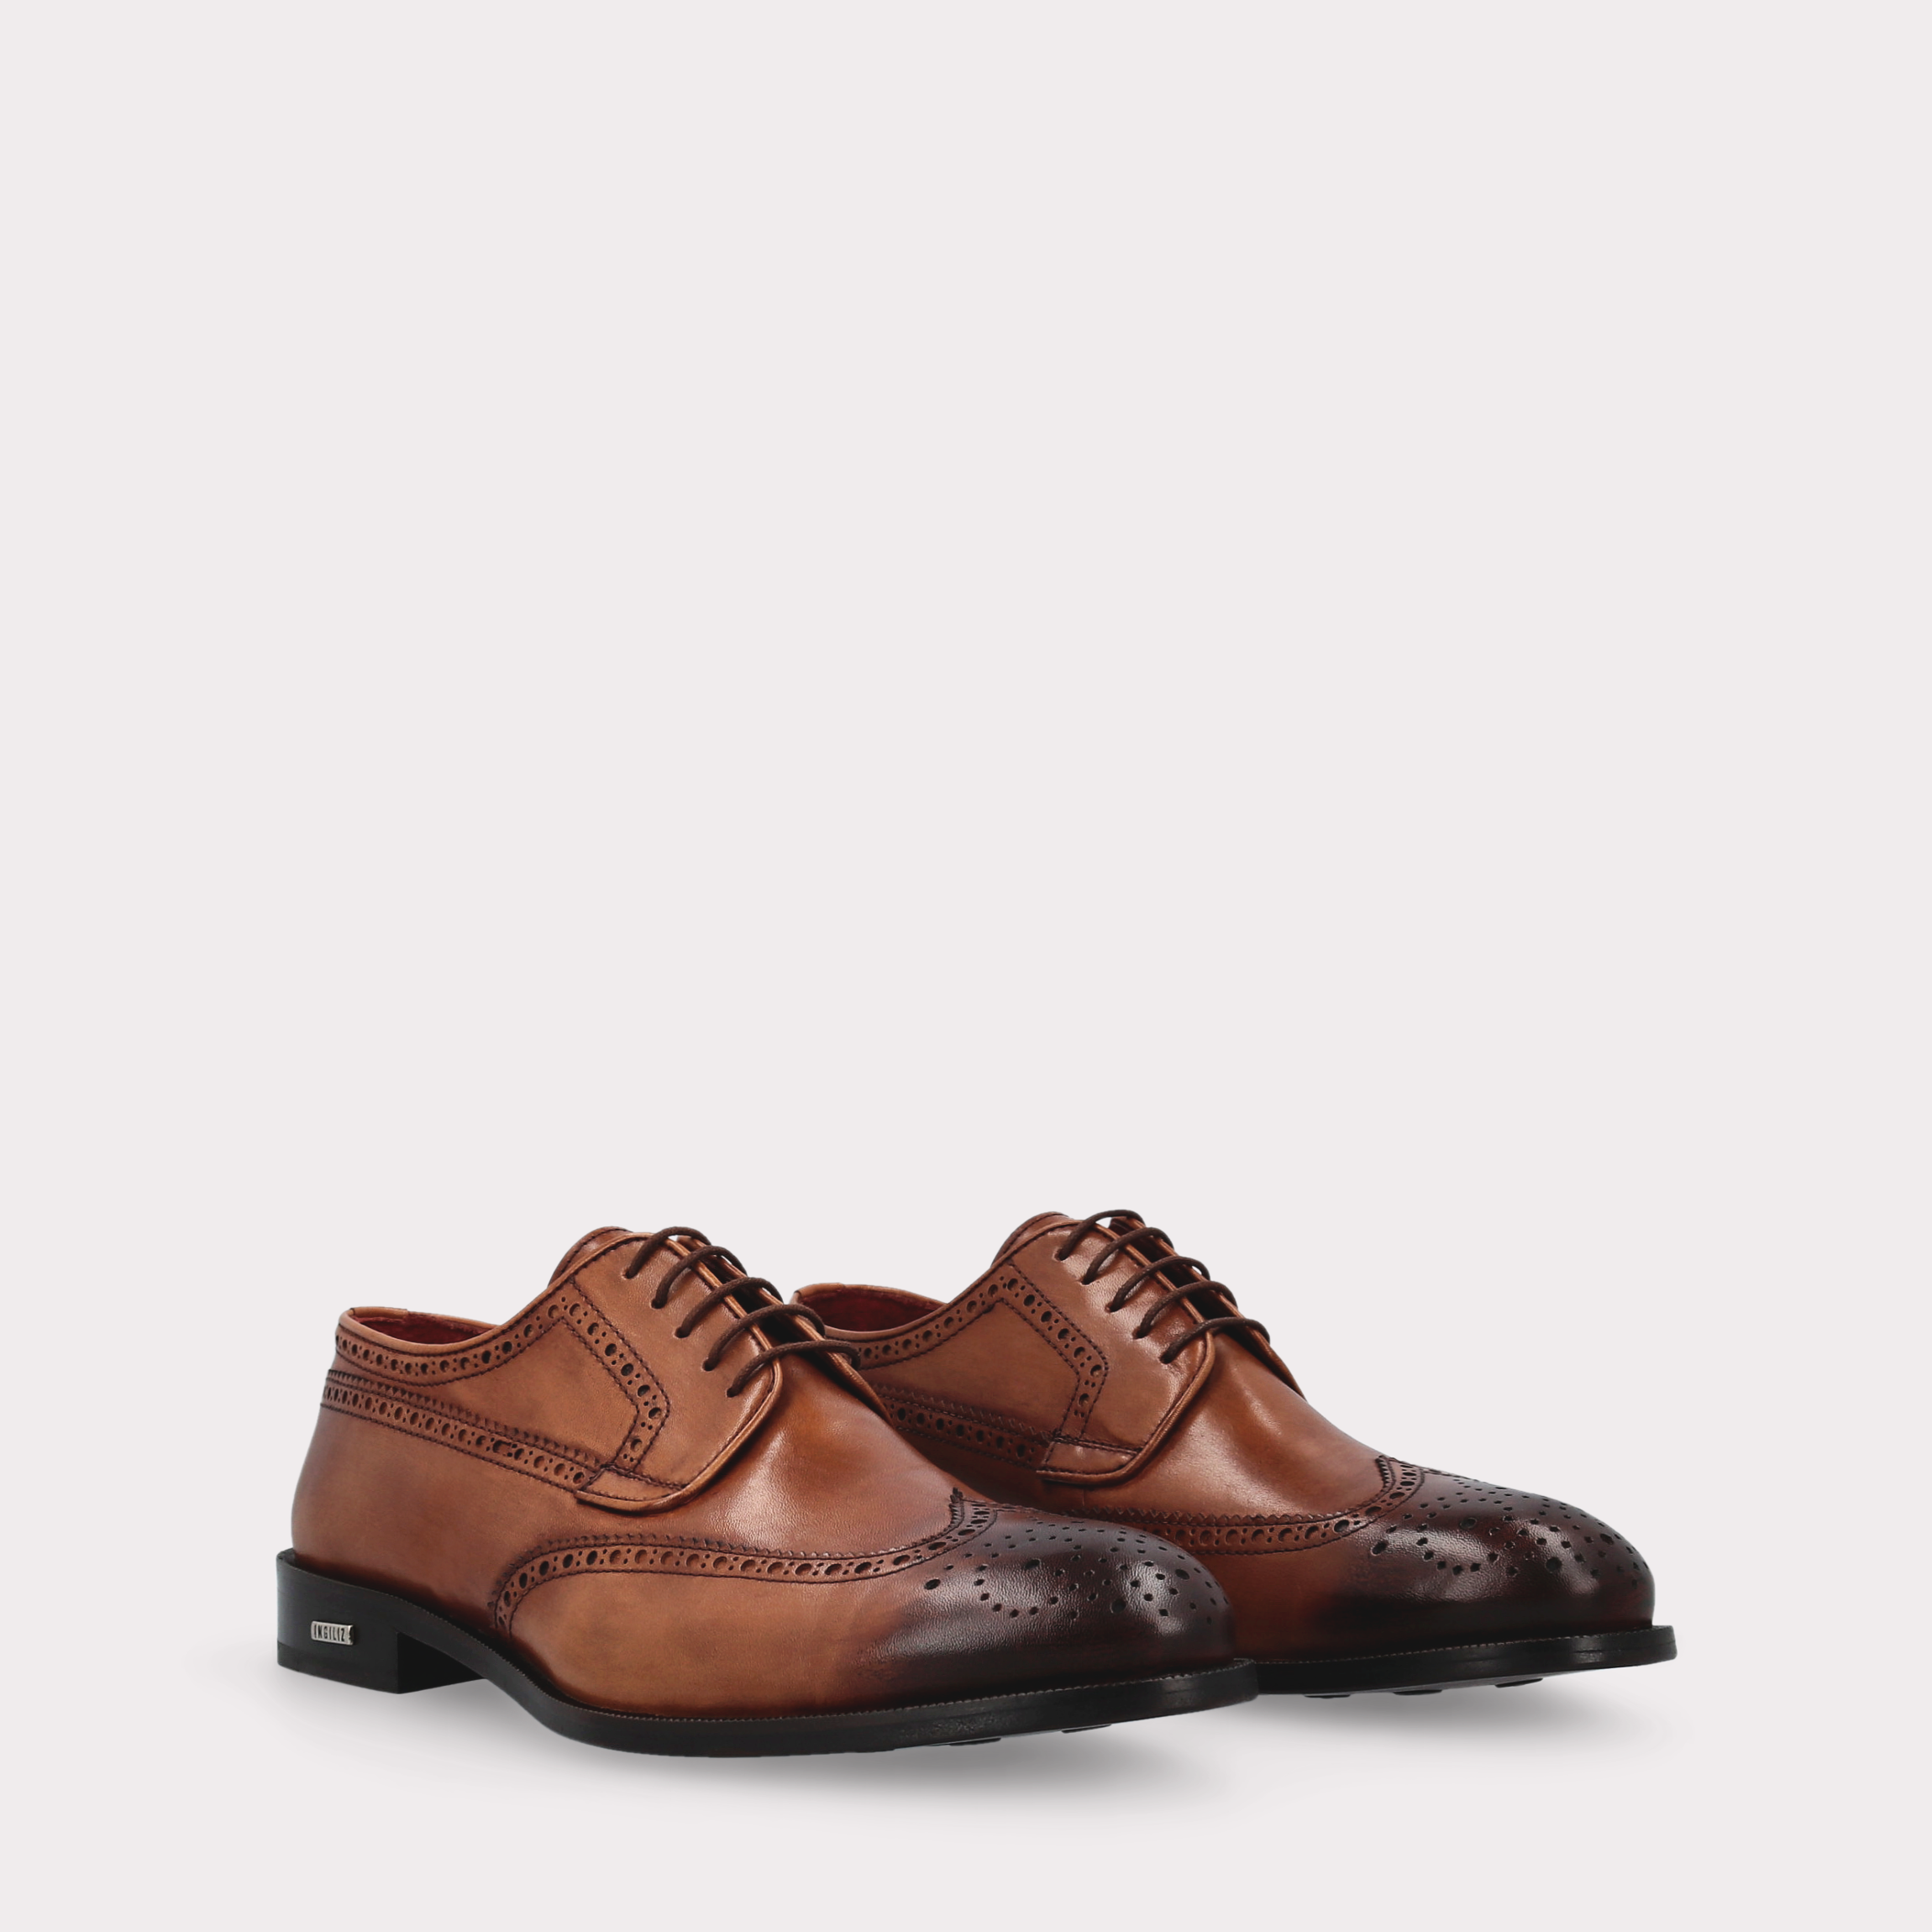 BERGAMO 01 brown leather derby shoes